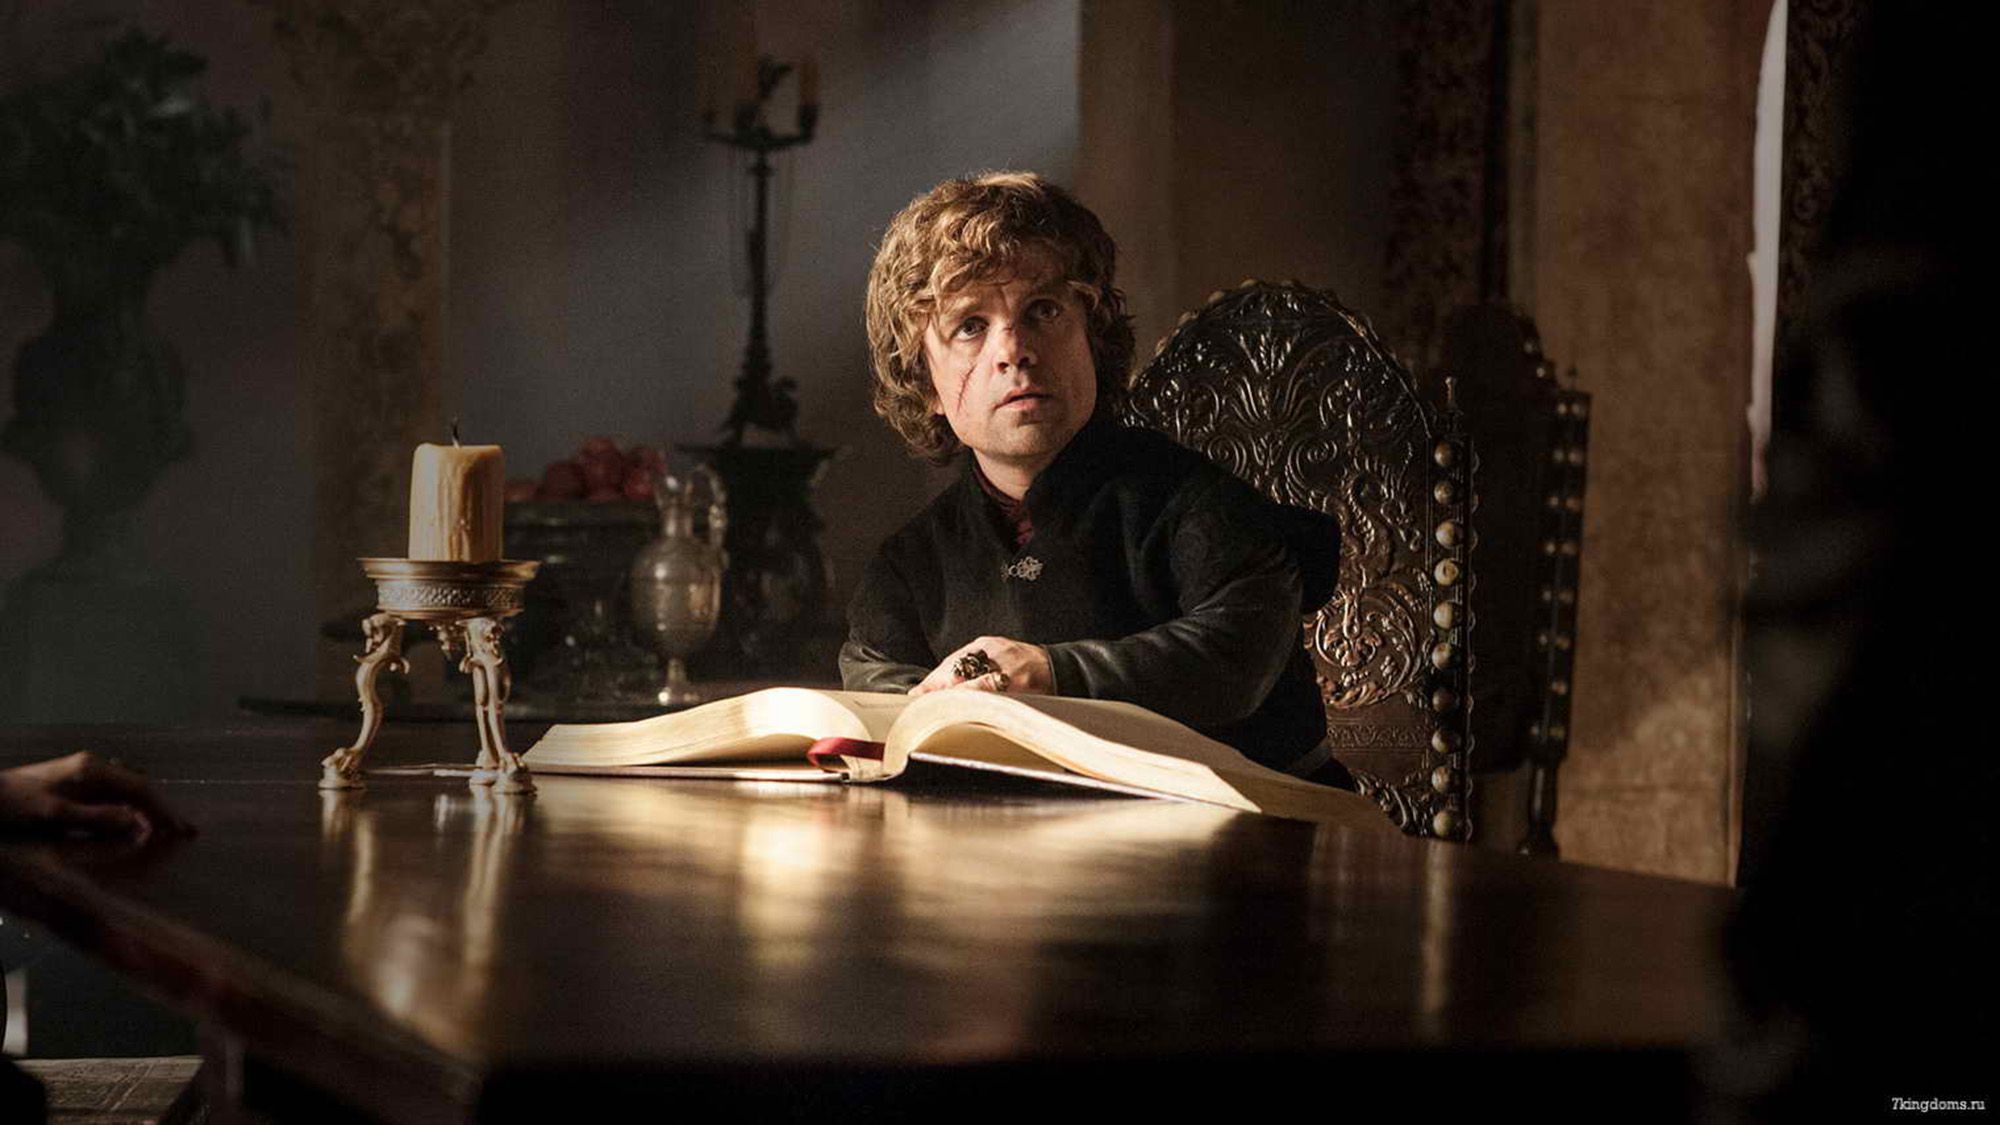 ⚔️ Everyone Has a Role to Play in “Game of Thrones” — What’s Yours? Tyrion Lannister